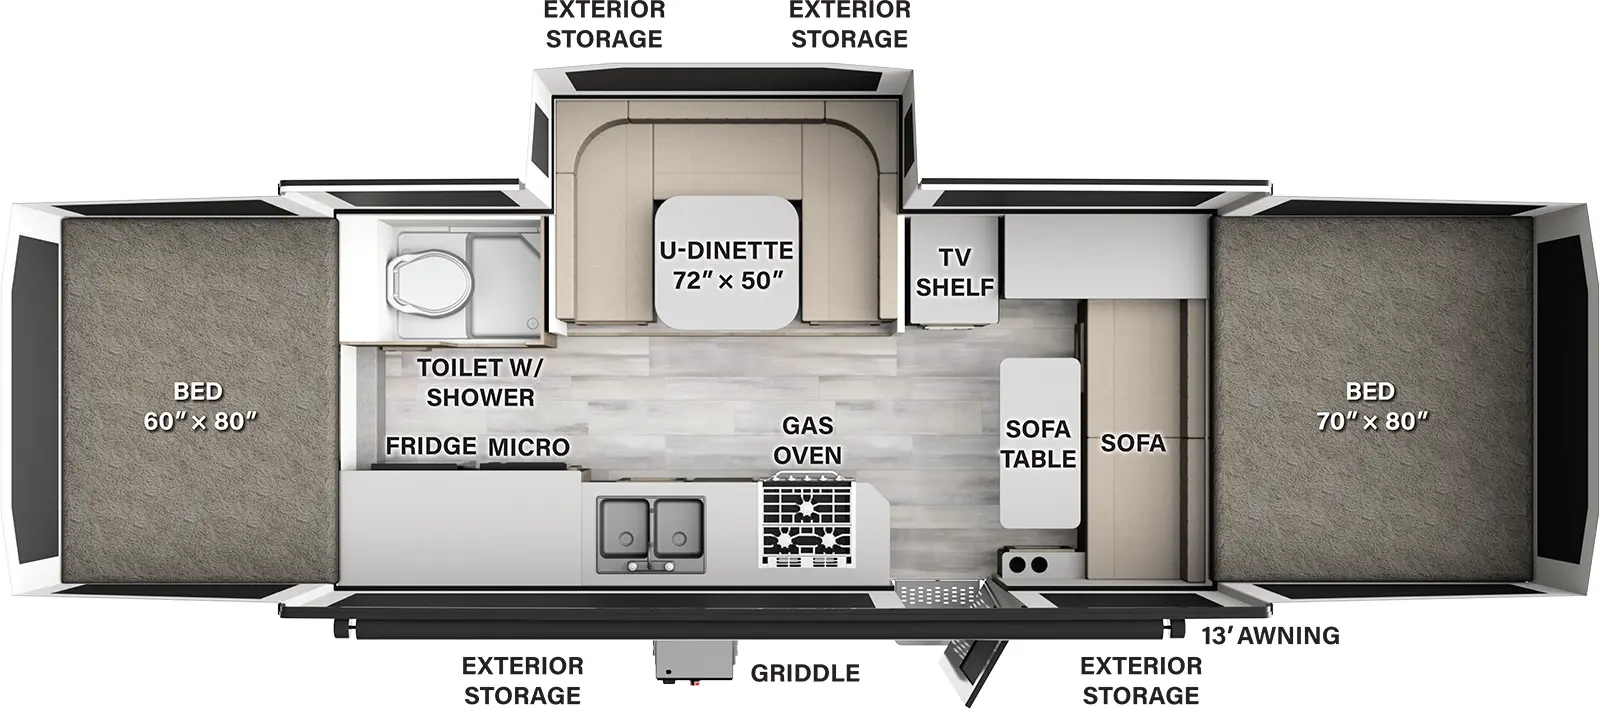 The HW296 has one slideout and one entry door. Exterior features a 13 foot awning, griddle, and exterior storage on both sides. Interior layout front to back: front tent bed; sofa, sofa table, cabinet, and TV shelf; off-door side u-dinette slideout and toilet with shower; door side entry, gas oven, sink and cabinet with microwave and refrigerator; rear tent bed. 